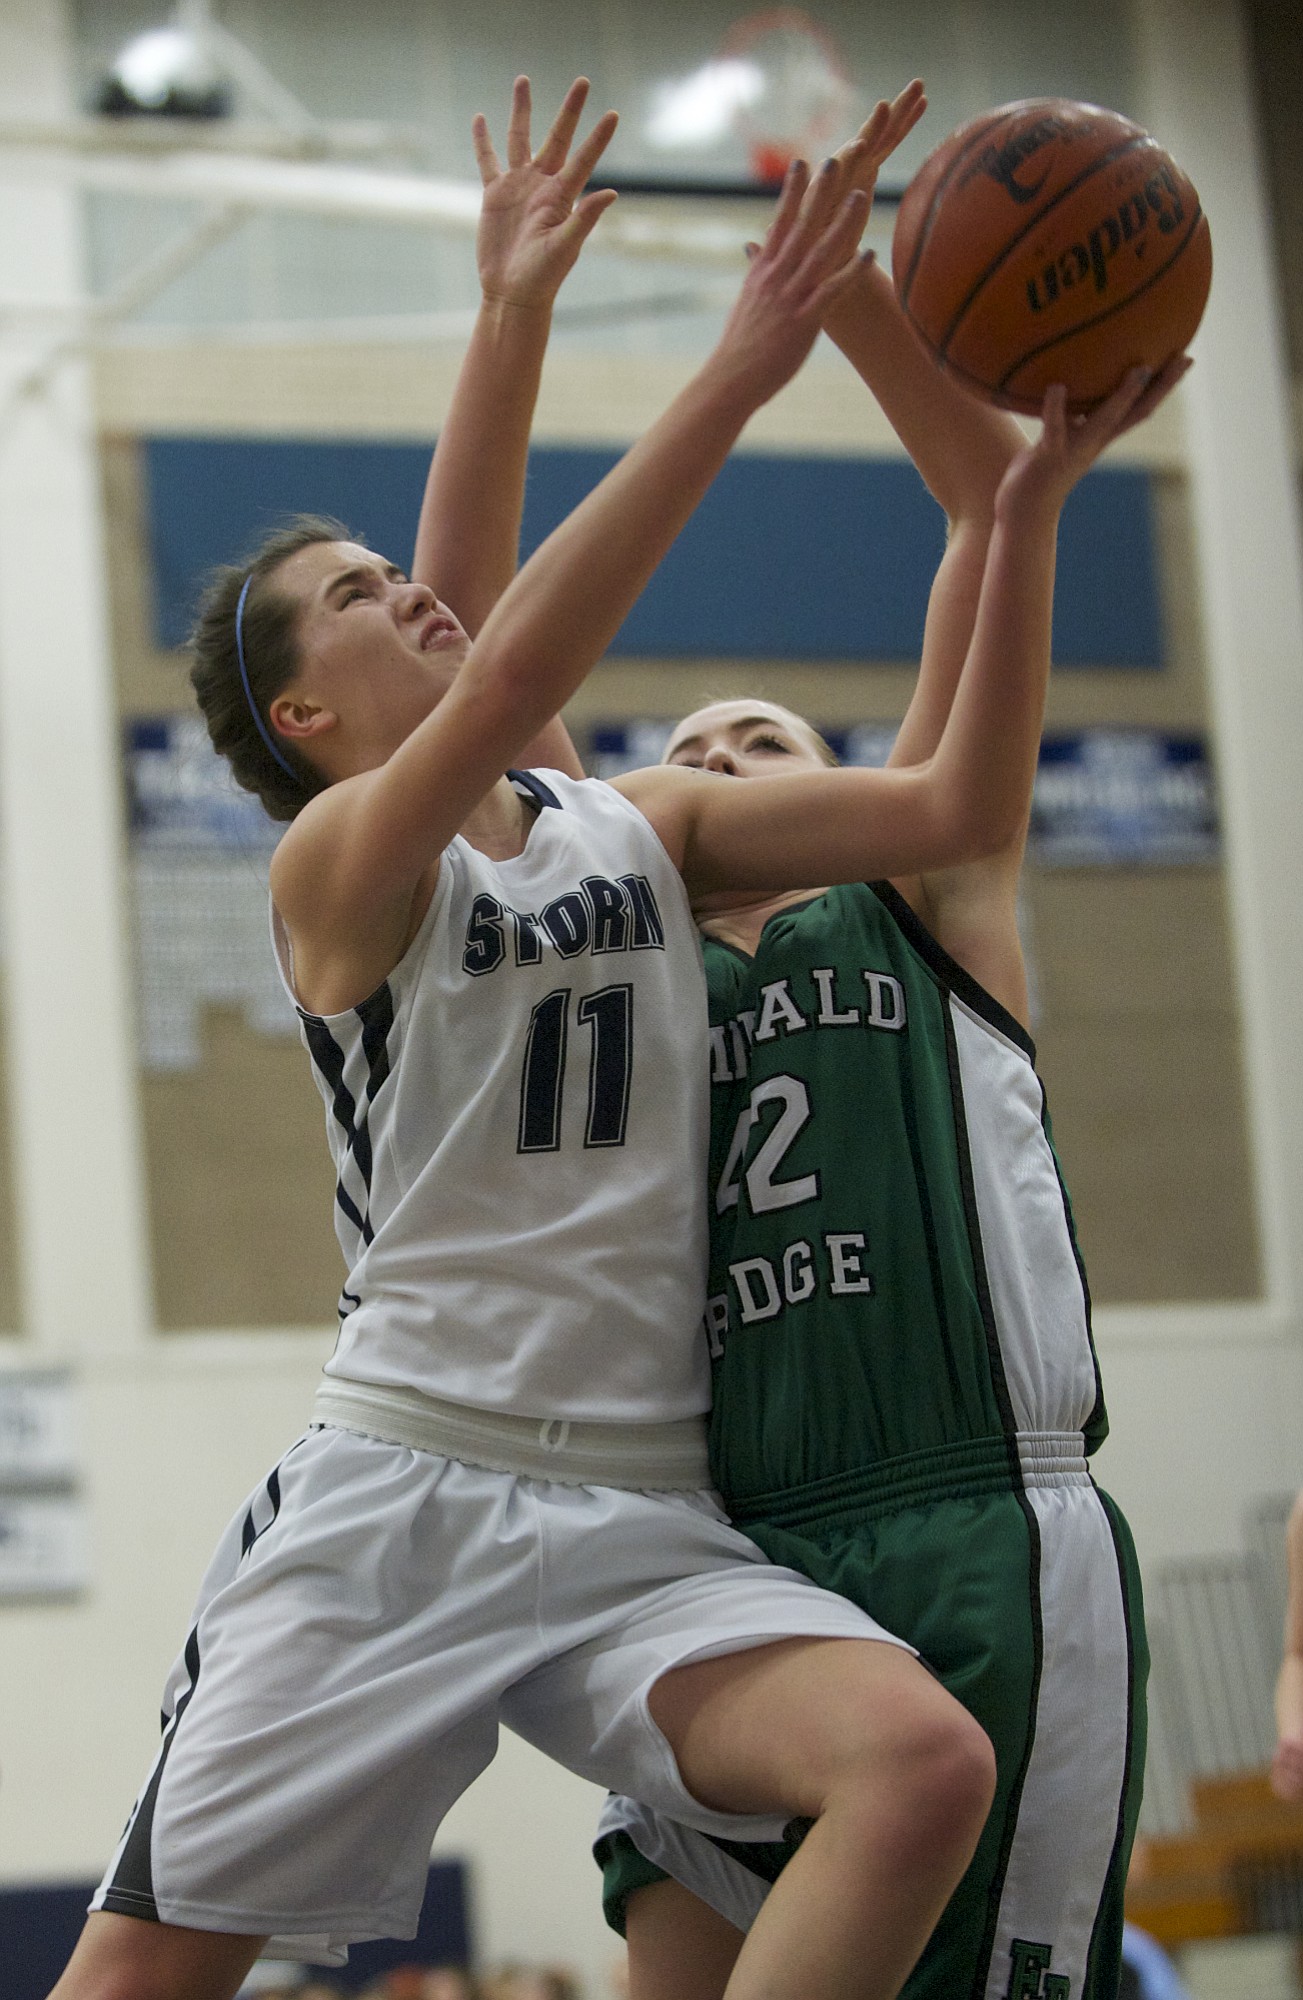 Skyview's Genevieve Lo, 11, drives to the basket against Emerald Ridge in the 4A girls bi-district playoff game at Skyview High School, Thursday, February 13, 2014.